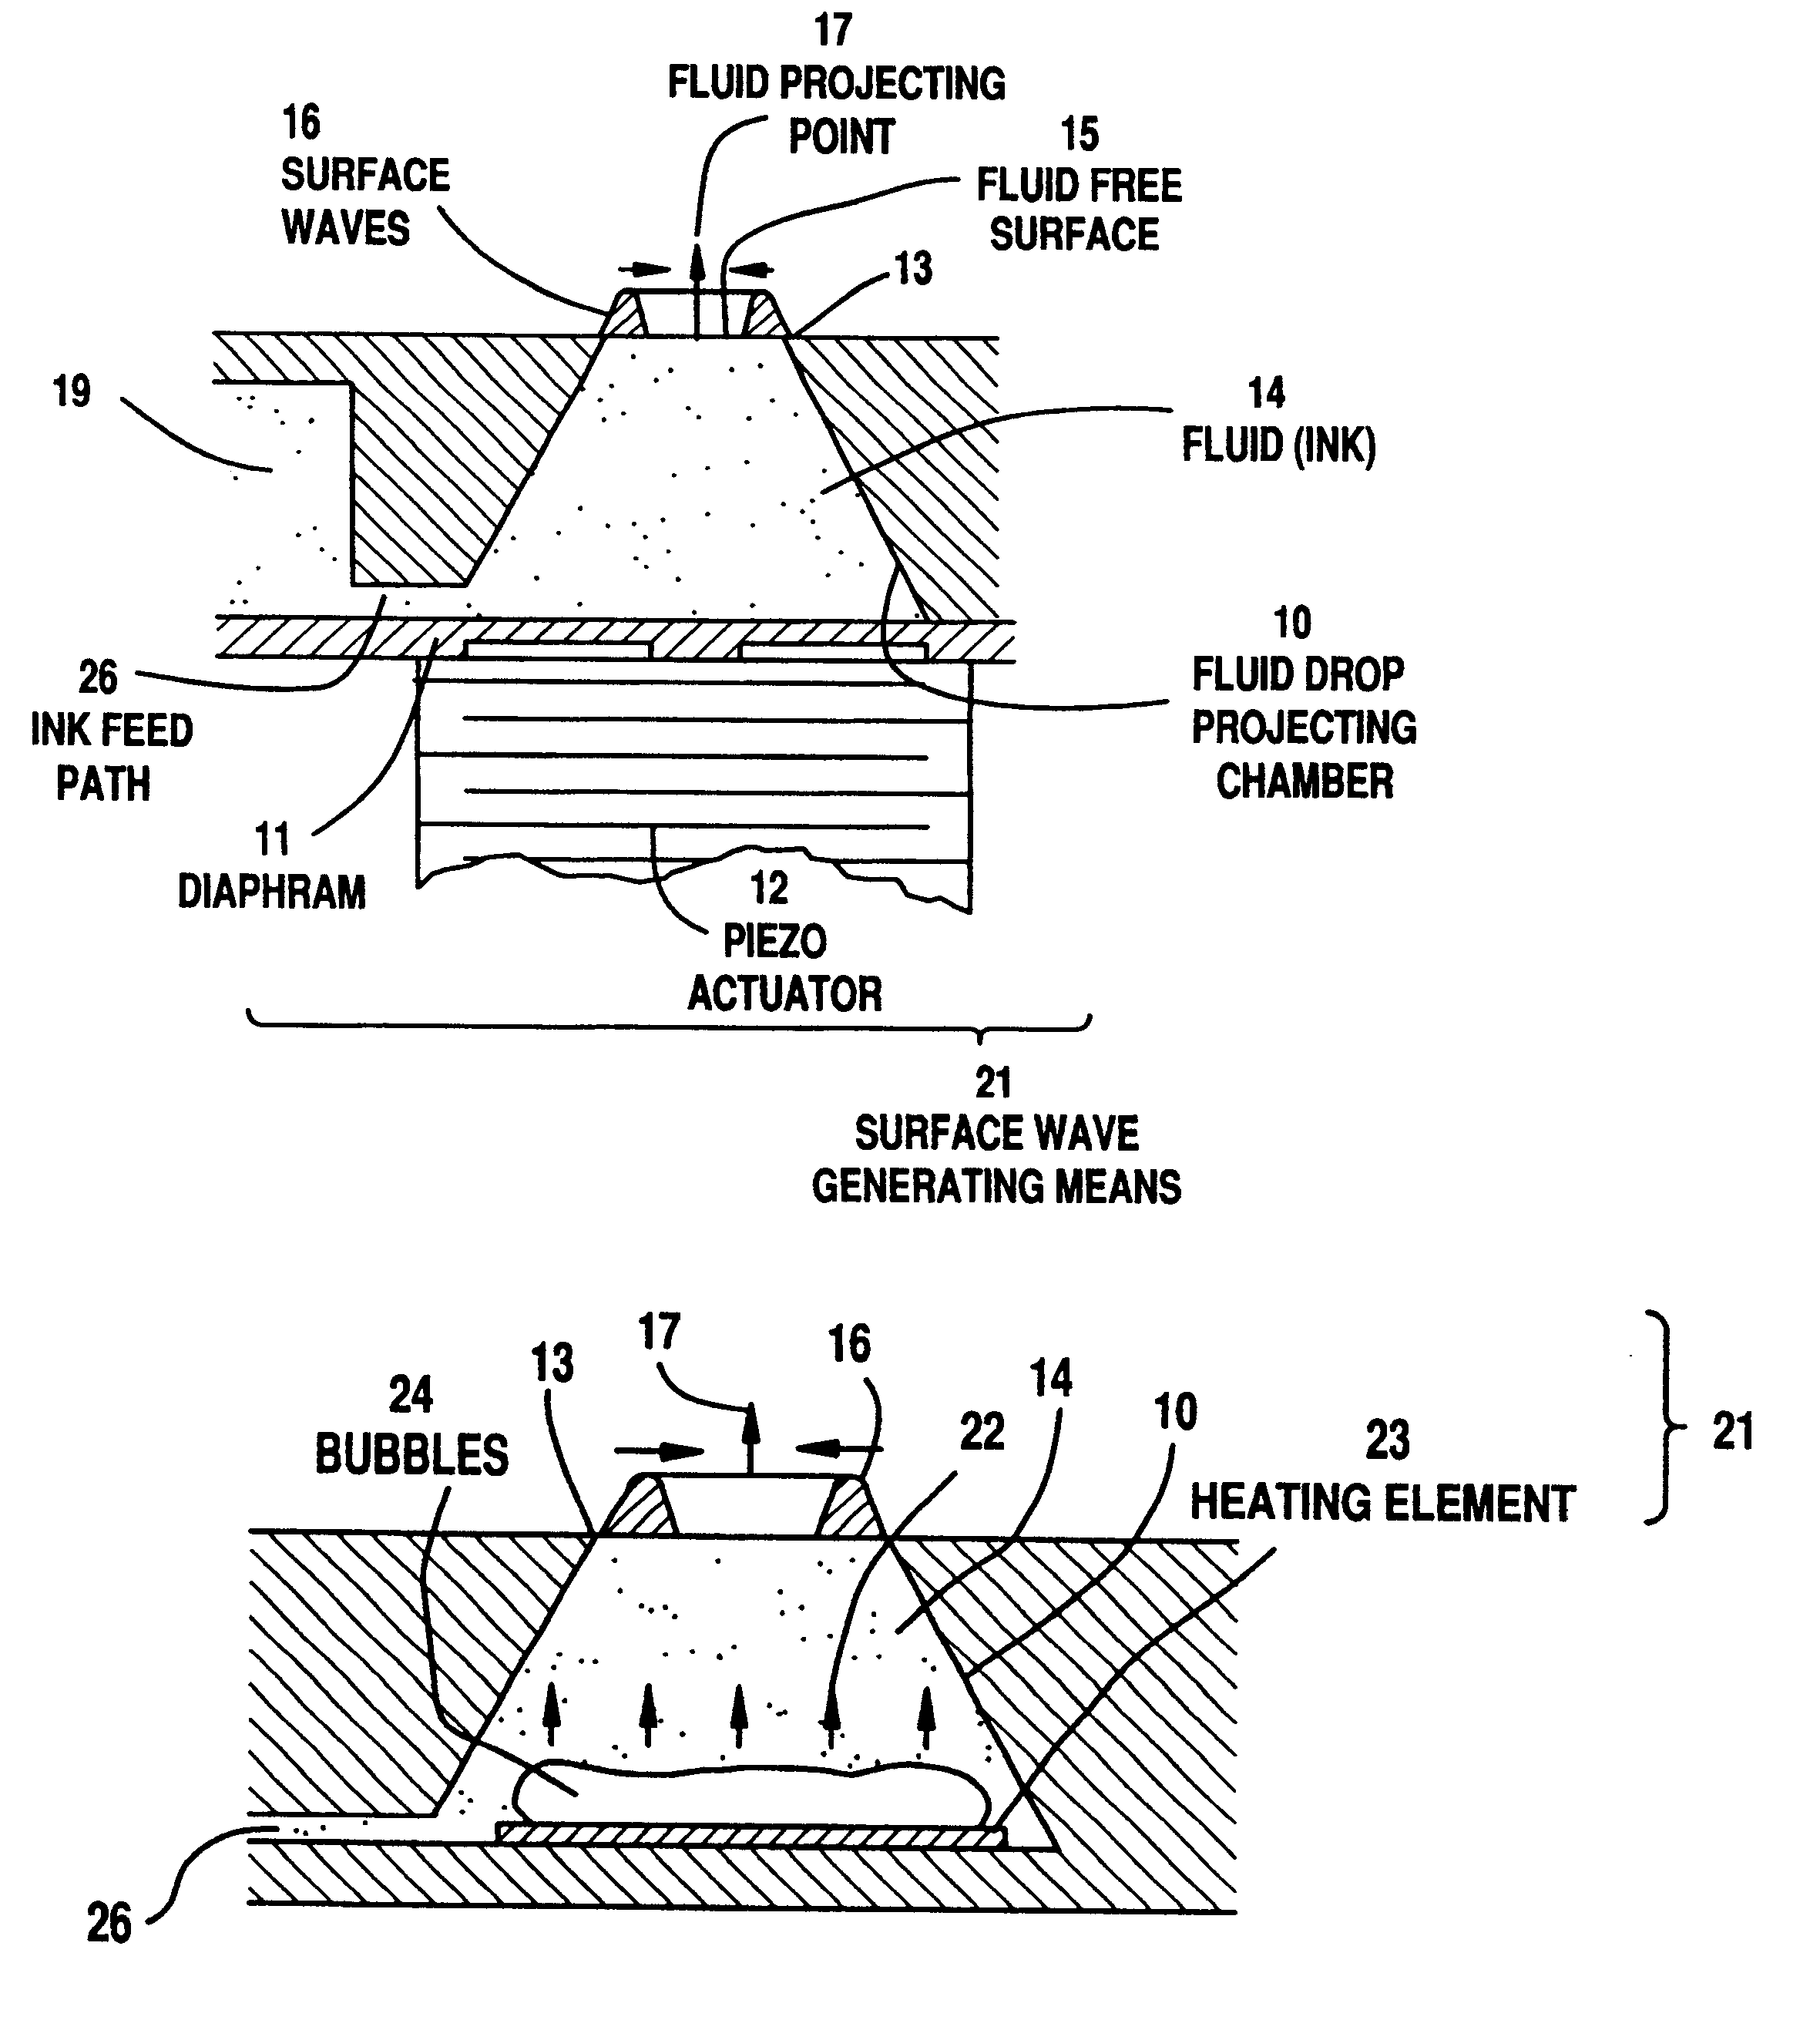 Fluid drop projecting head using taper-shaped chamber for generating a converging surface wave